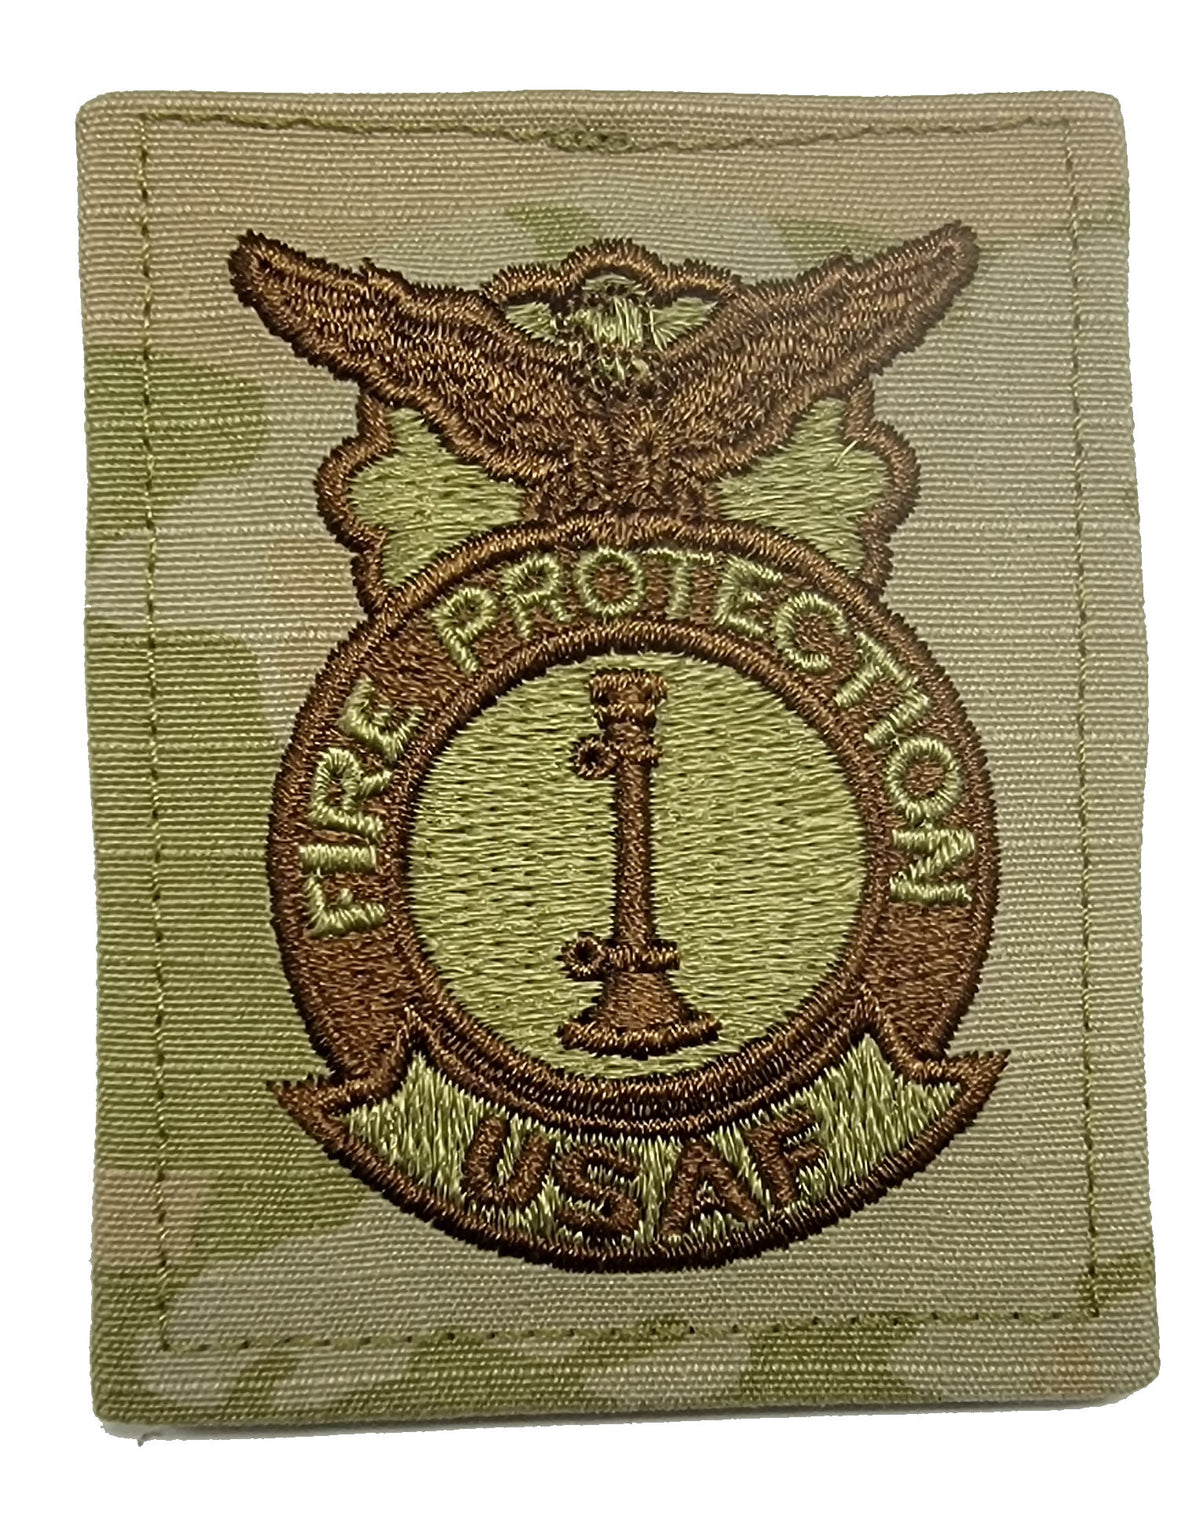 U.S. Air Force Fire Protection Engineer OCP Badge Patch - 1 Bugle Parallel